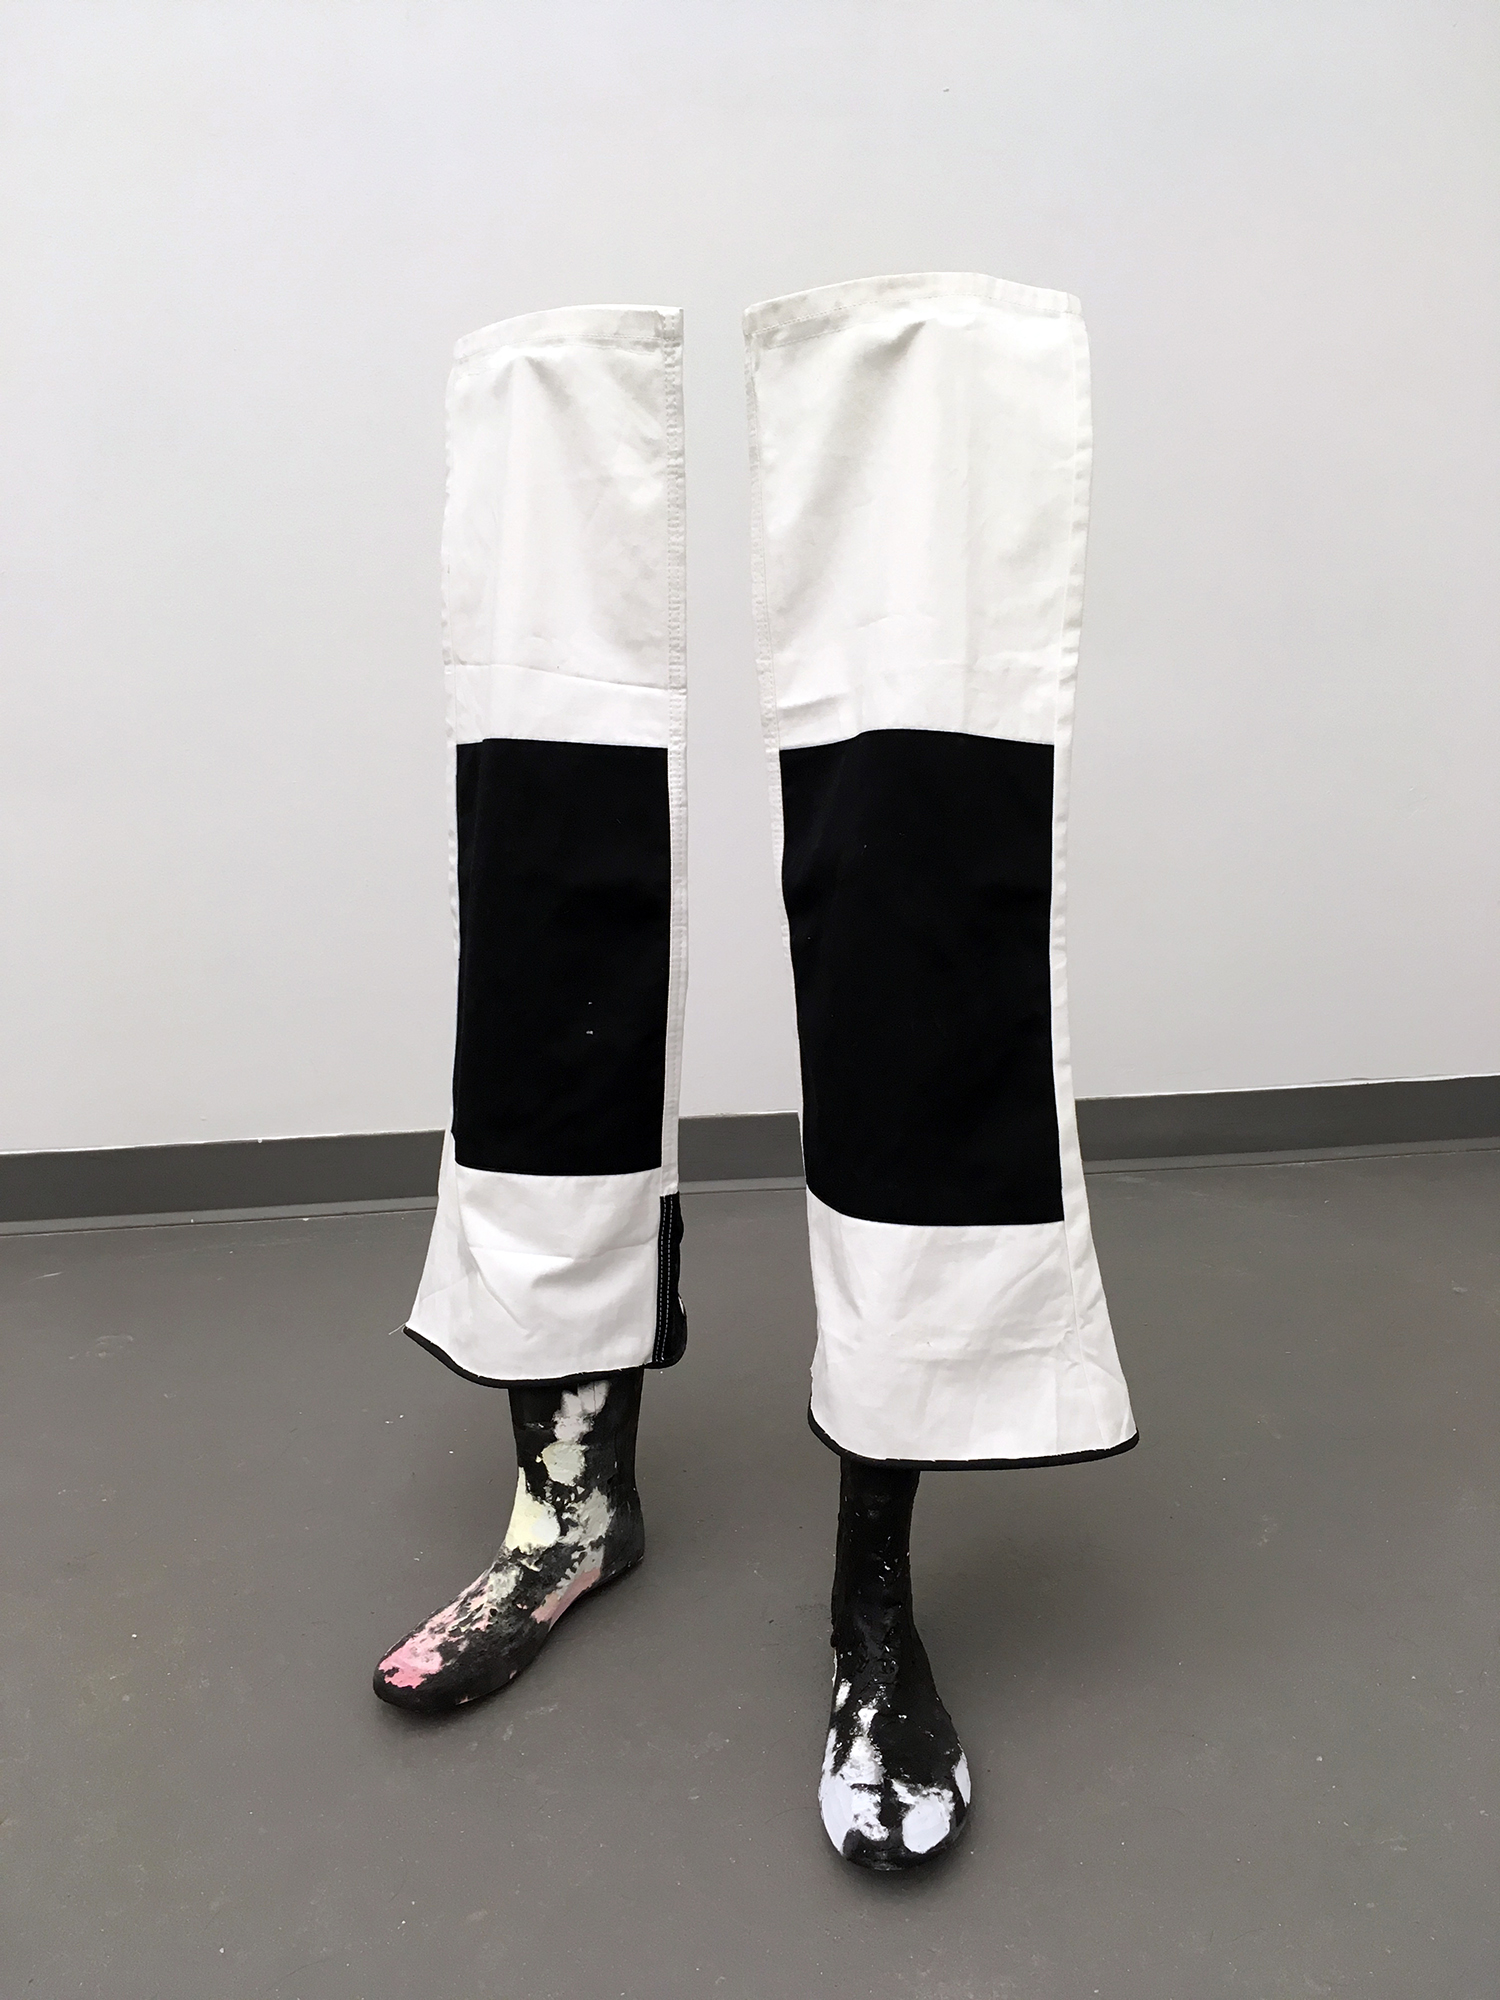 Walter Scott, Piranha Pants, 2018, plaster, acrylic, wood and fabric, dimensions variable. Courtesy of the artist.